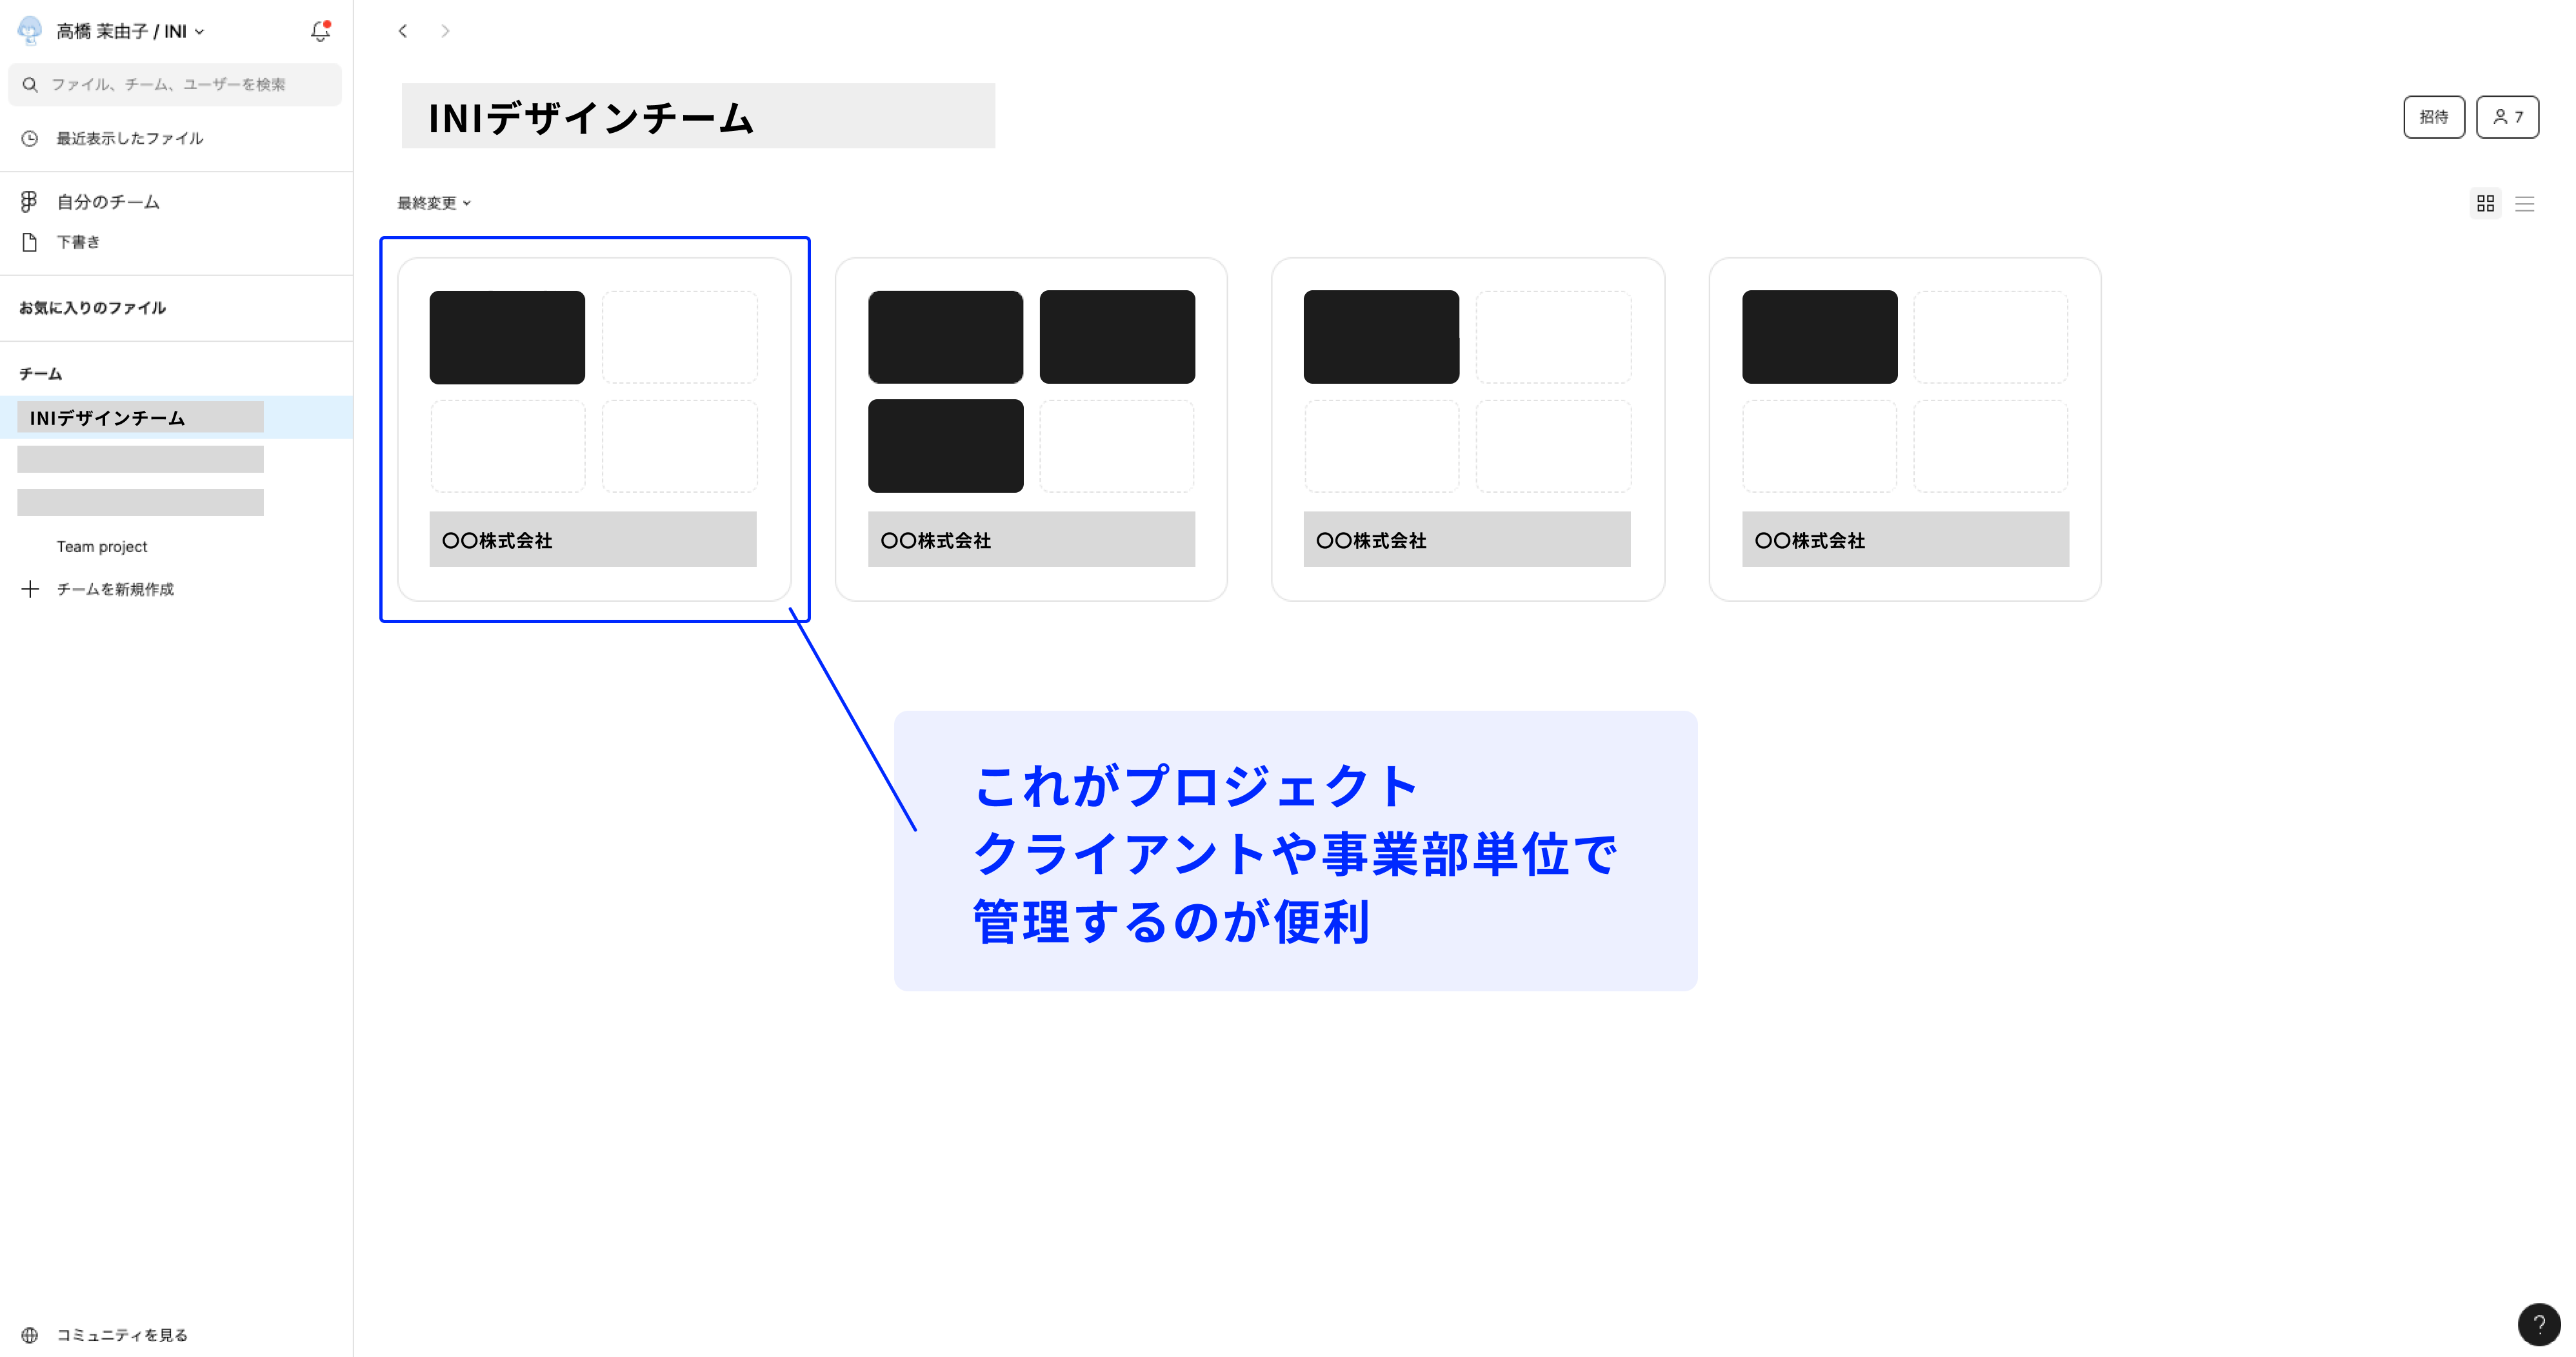 figma-basics-structure-3.png